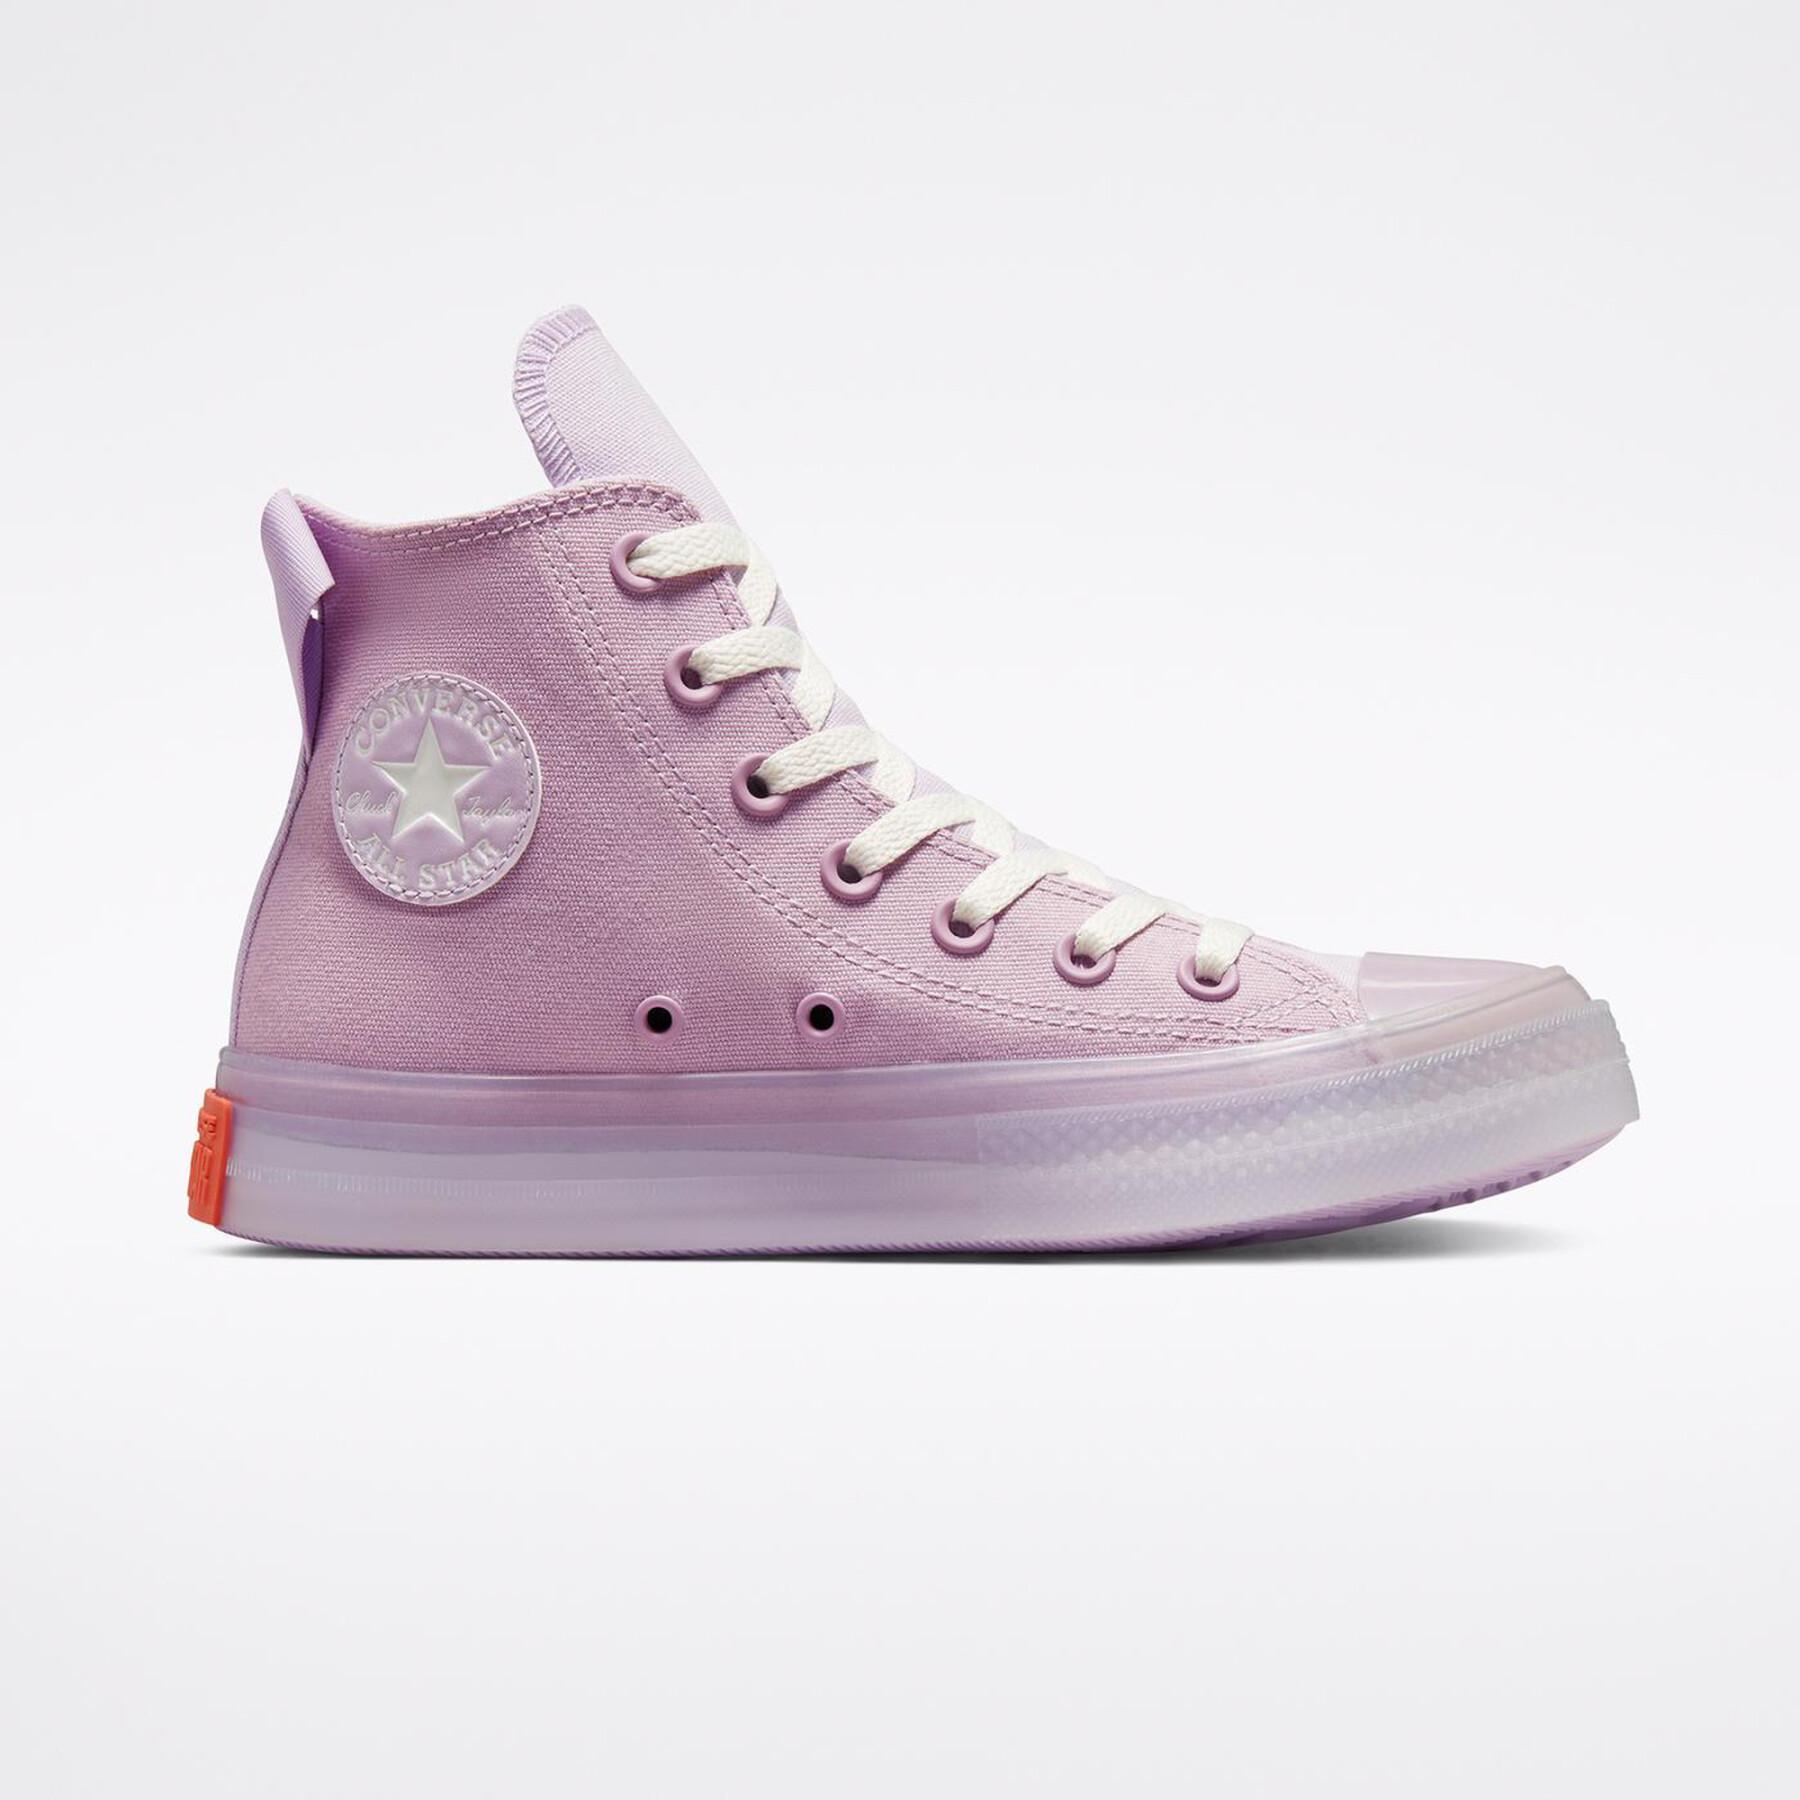 Formadores Converse Chuck Taylor All Star Cx Stretch